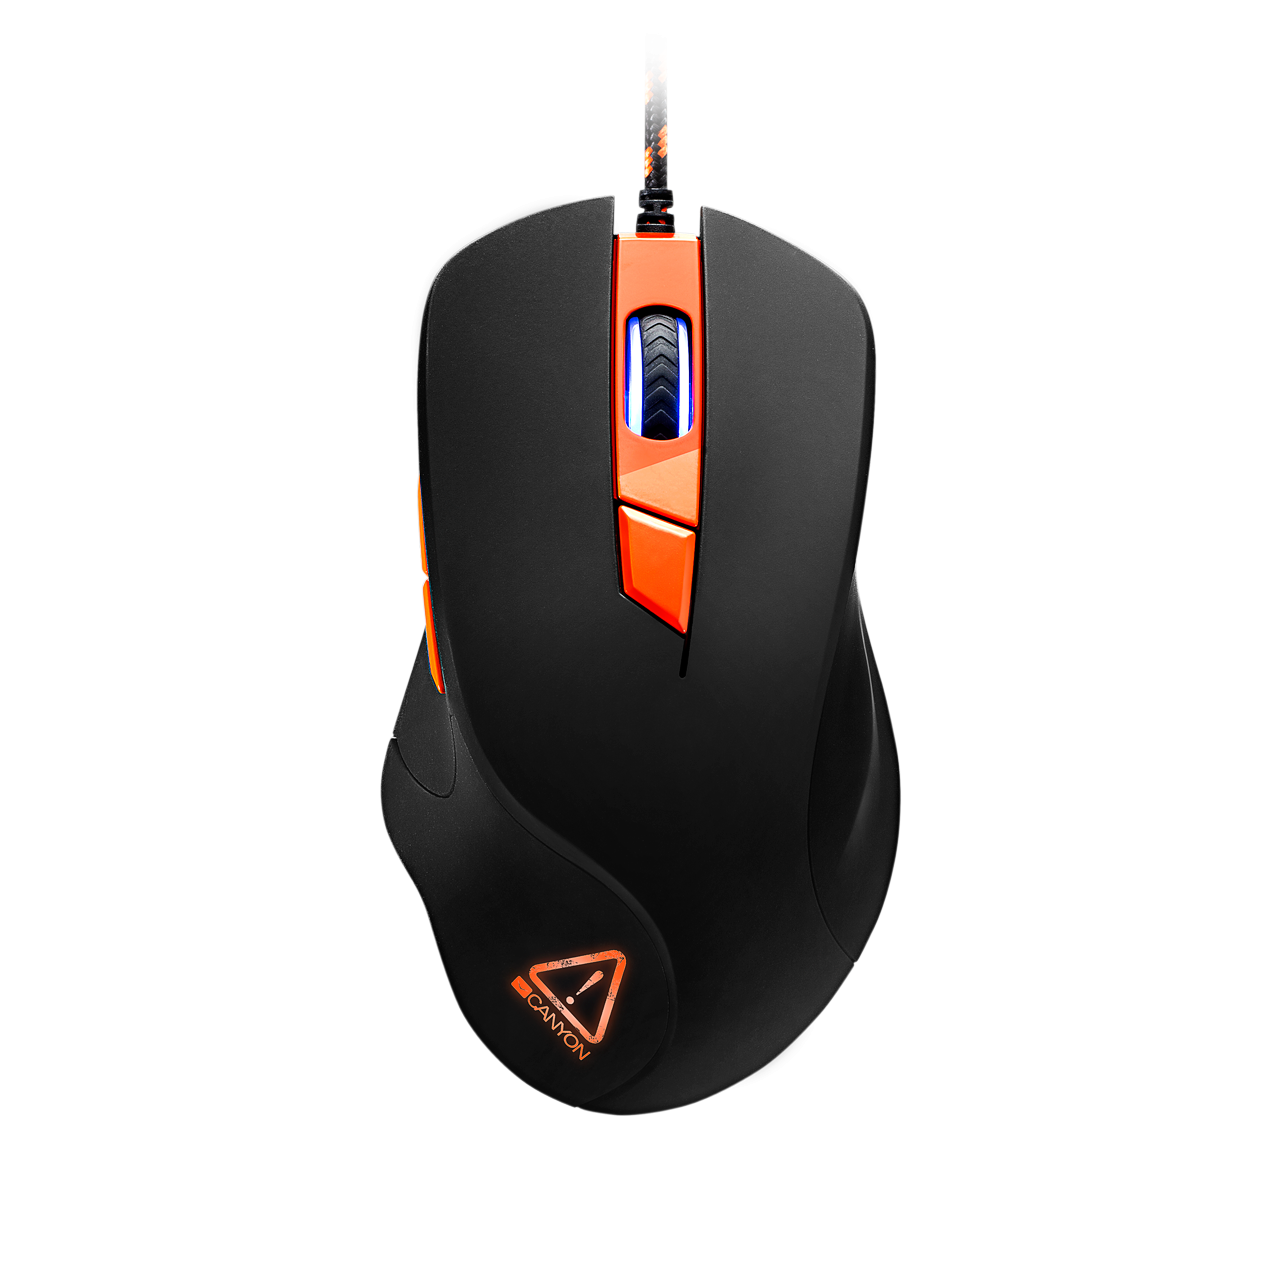 Wired Gaming Mouse with 6 programmable buttons, Pixart optical sensor, 4 levels of DPI and up to 3200, 5 million times key life